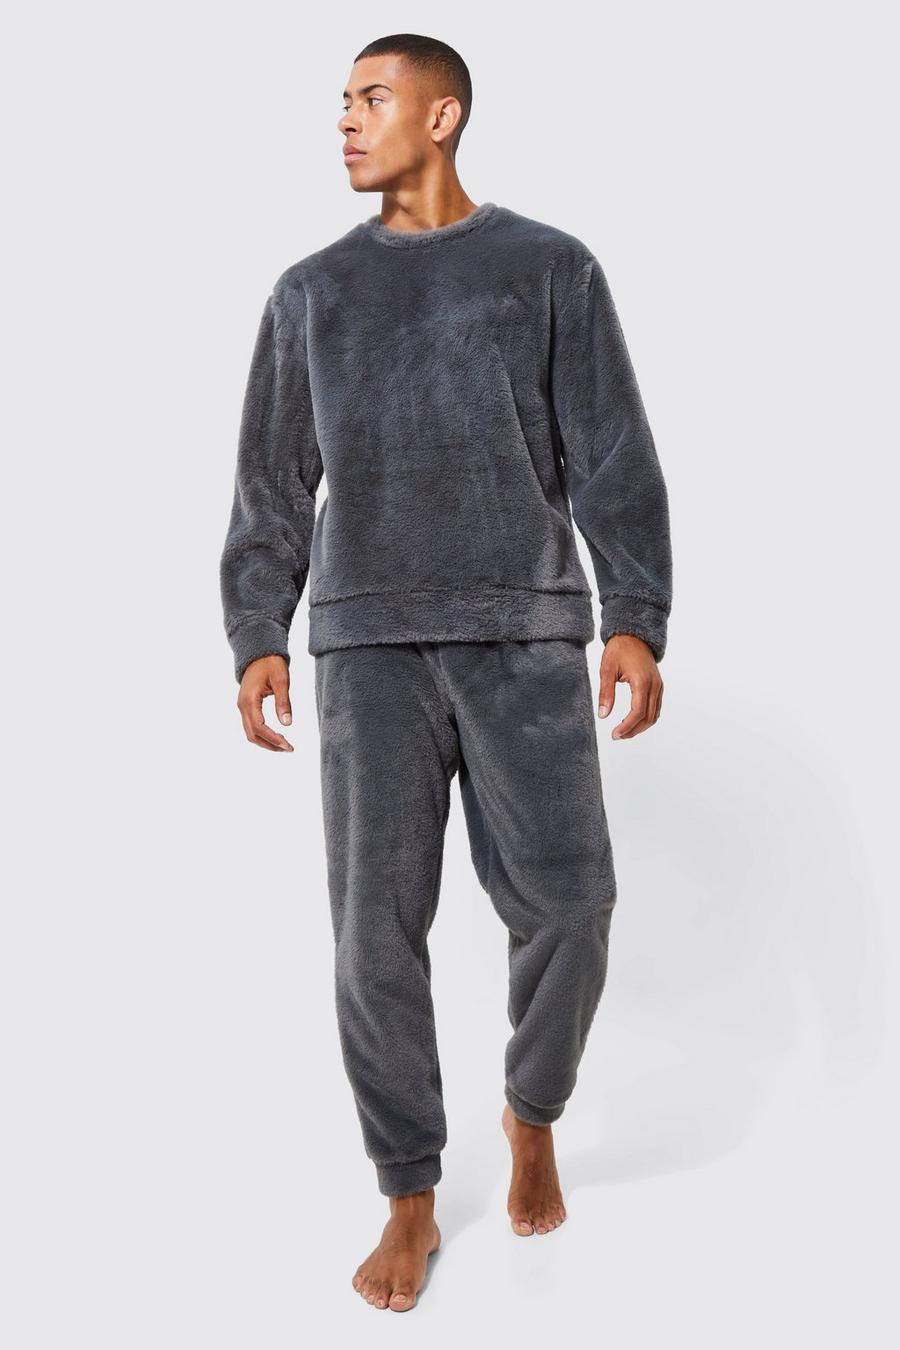 Charcoal grey Faux Fur Oversized Sweater and Cuffed Jogger Lounge Set